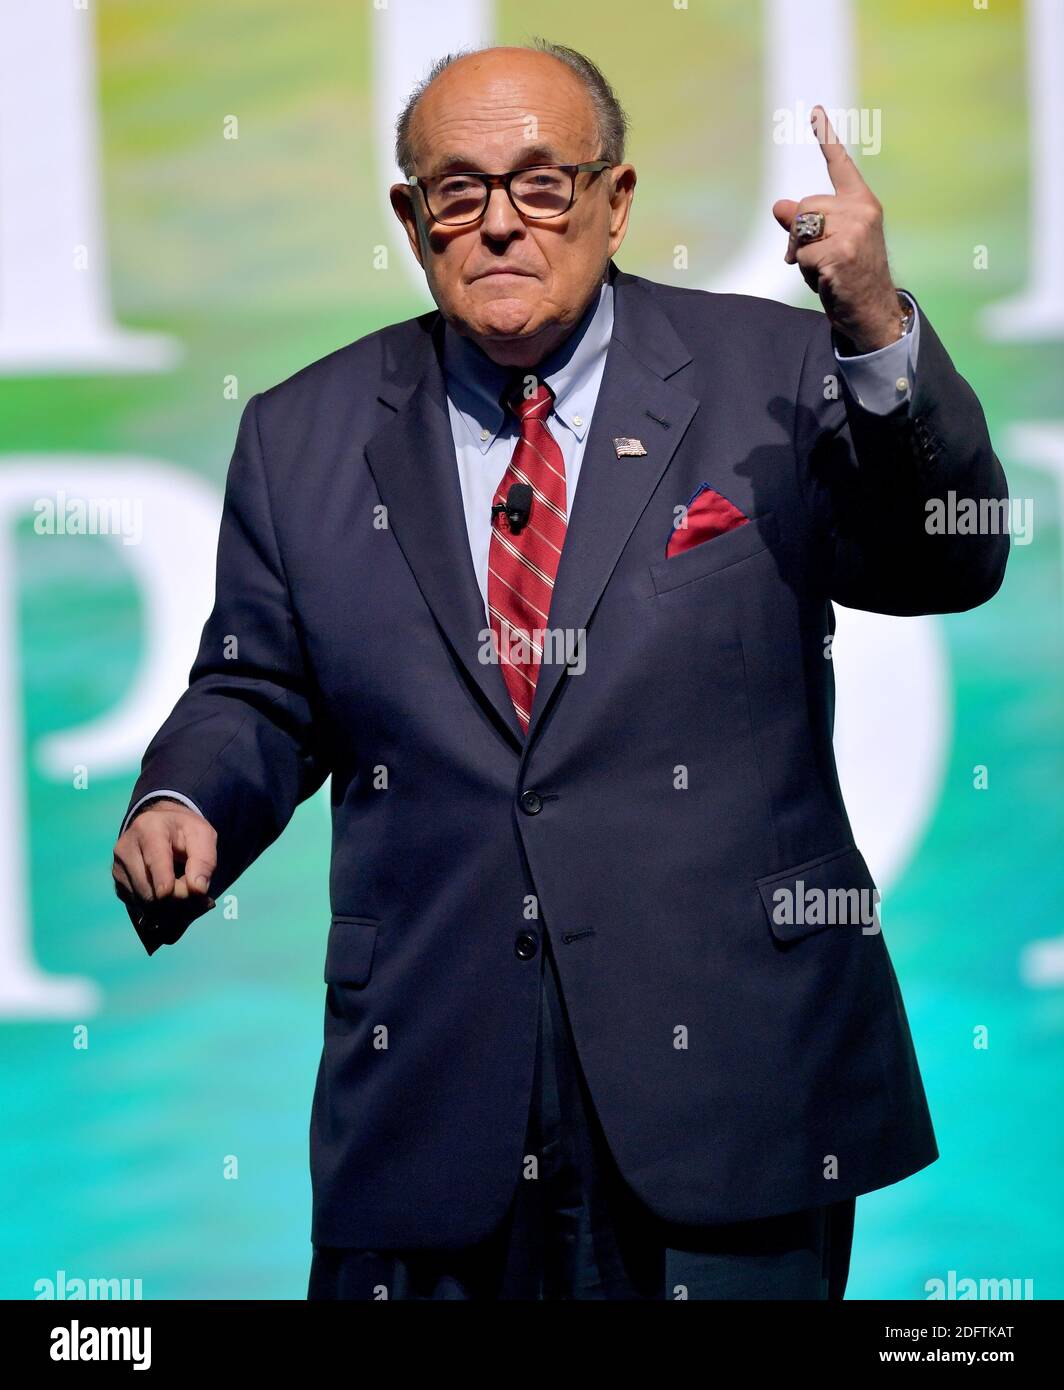 West Palm Beach, FL, USA. 19th Dec, 2020. Wearing his New York Yankee's World Series ring, Former New York City Mayor and attorney for President Donald Trump Rudy Giuliani speaks at the 2019 Turning Point USA Student Action Summit - Day 1 at the Palm Beach County Convention Center on December 19, 2019 in West Palm Beach, Florida. People: Rudy Giuliani Credit: Hoo Me/Media Punch/Alamy Live News Stock Photo